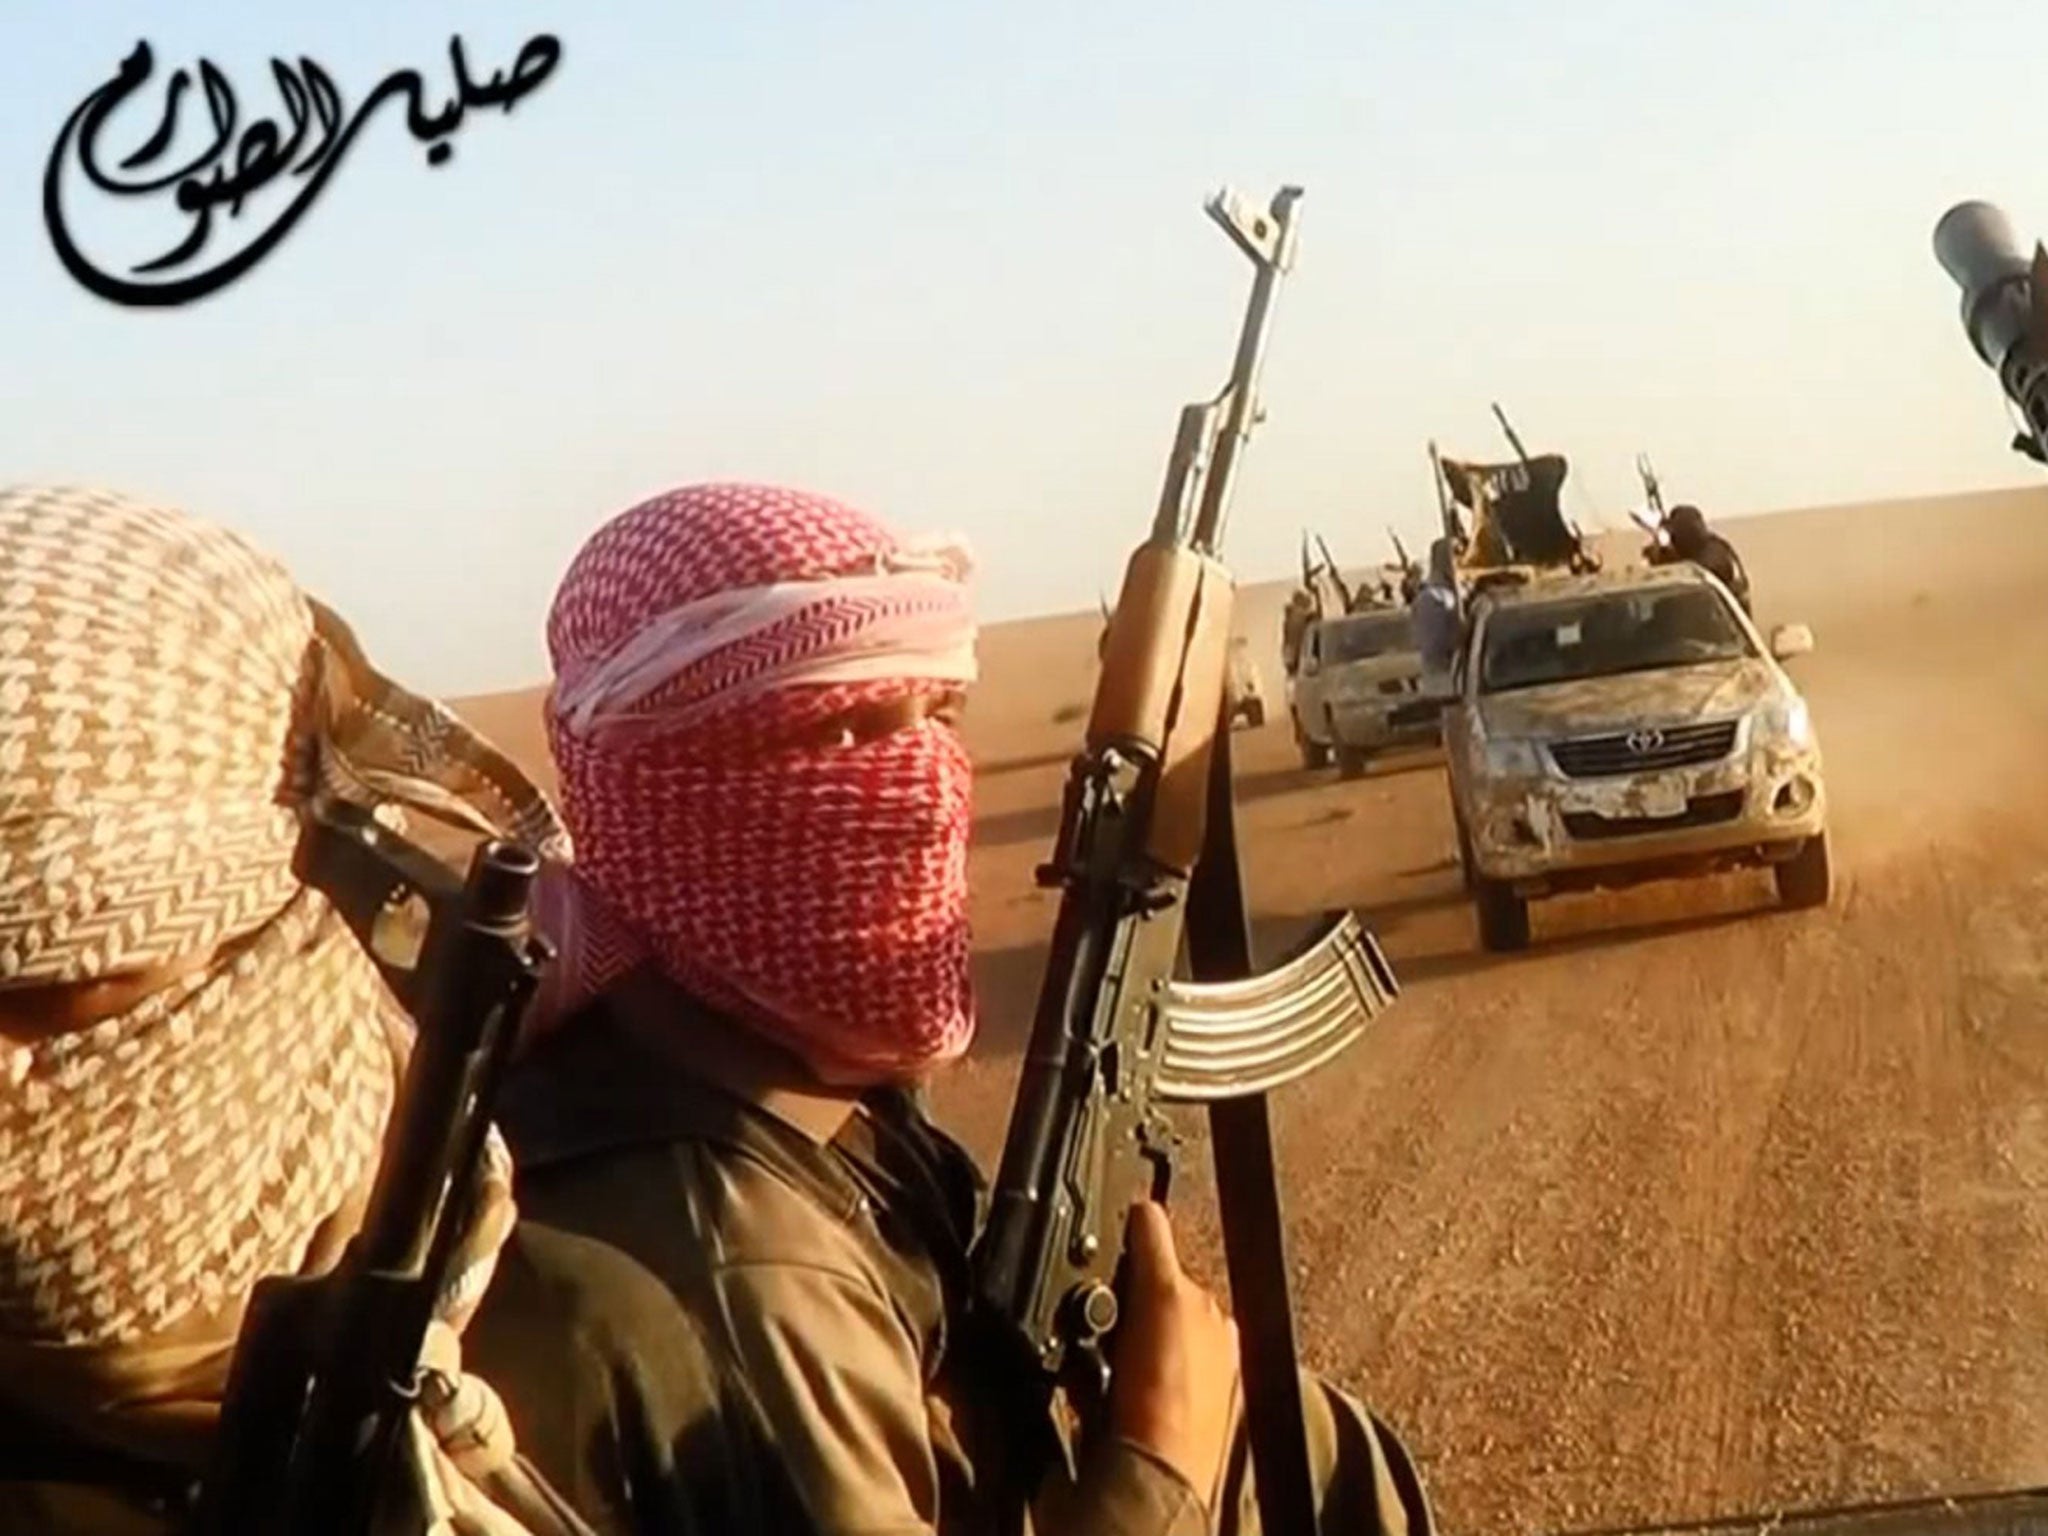 An Isis propaganda video purporting to show fighters near the Iraqi city of Tikrit